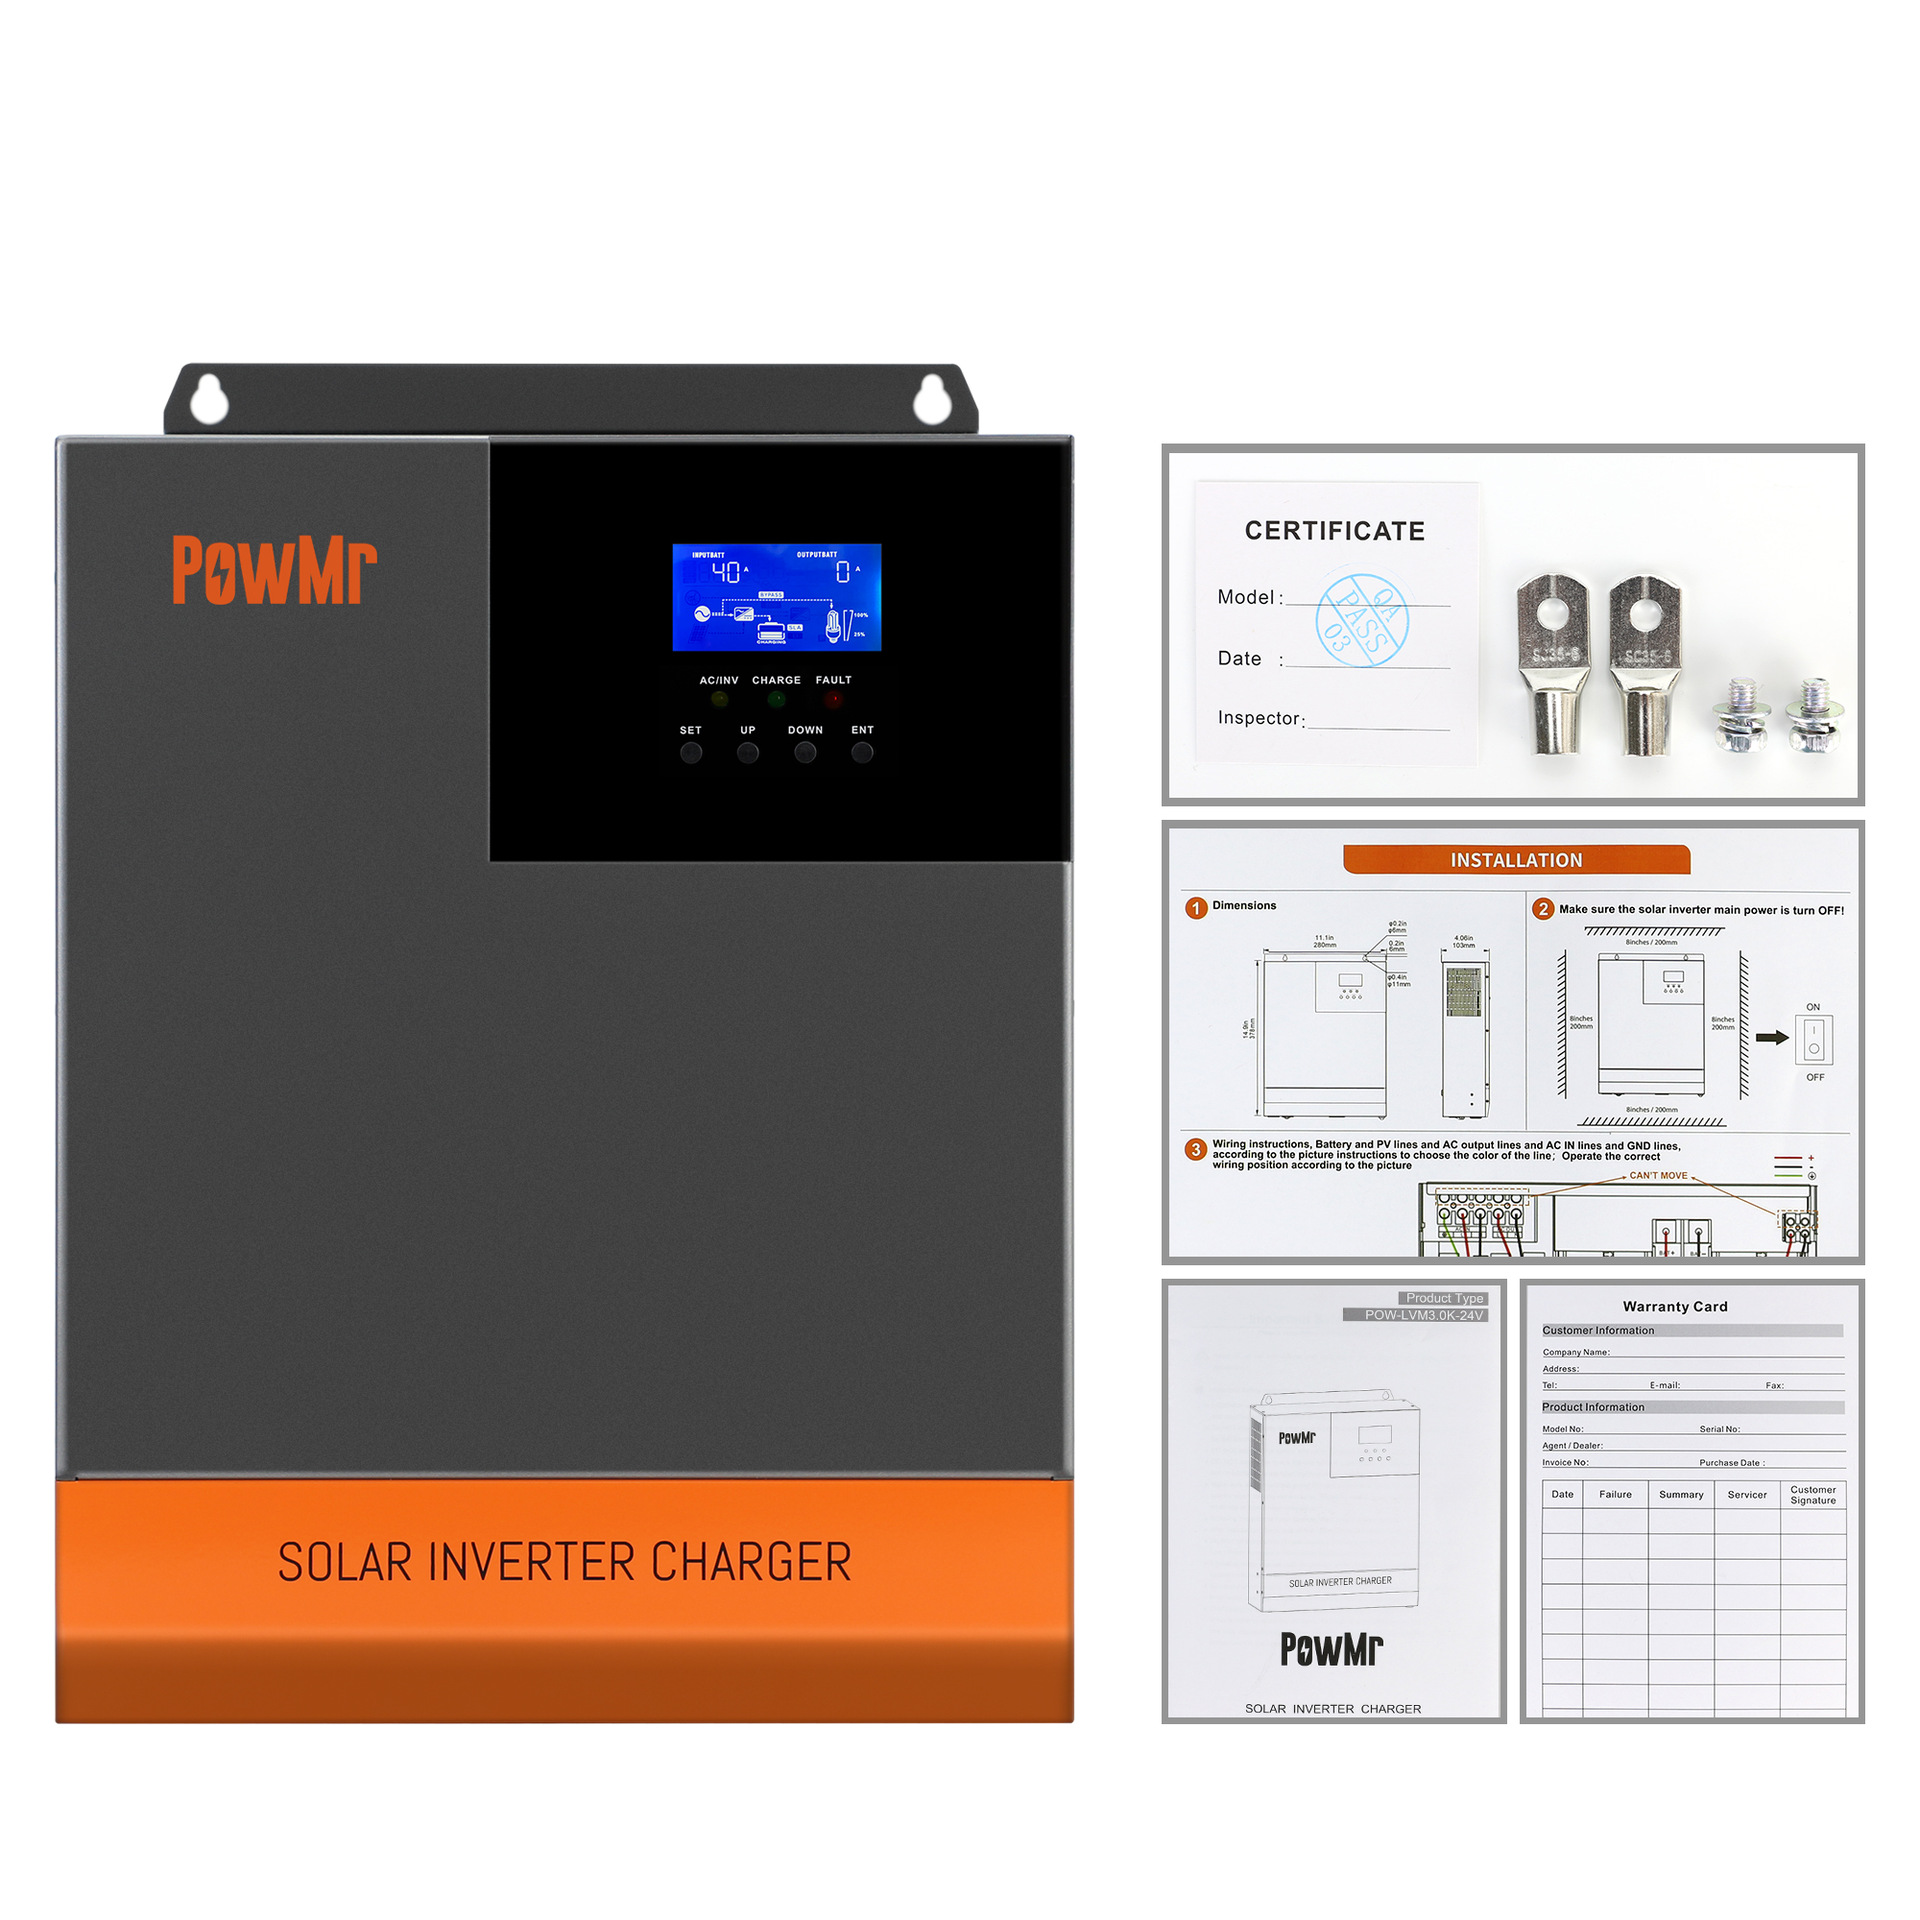 Find PowMr 5000W High Frequency Pure Sine Wave Photovoltaic RV Inverter Lithium Battery 48V to AC220/230V 80A MPPT Wide Voltage POW HPM 5 6KW for Sale on Gipsybee.com with cryptocurrencies